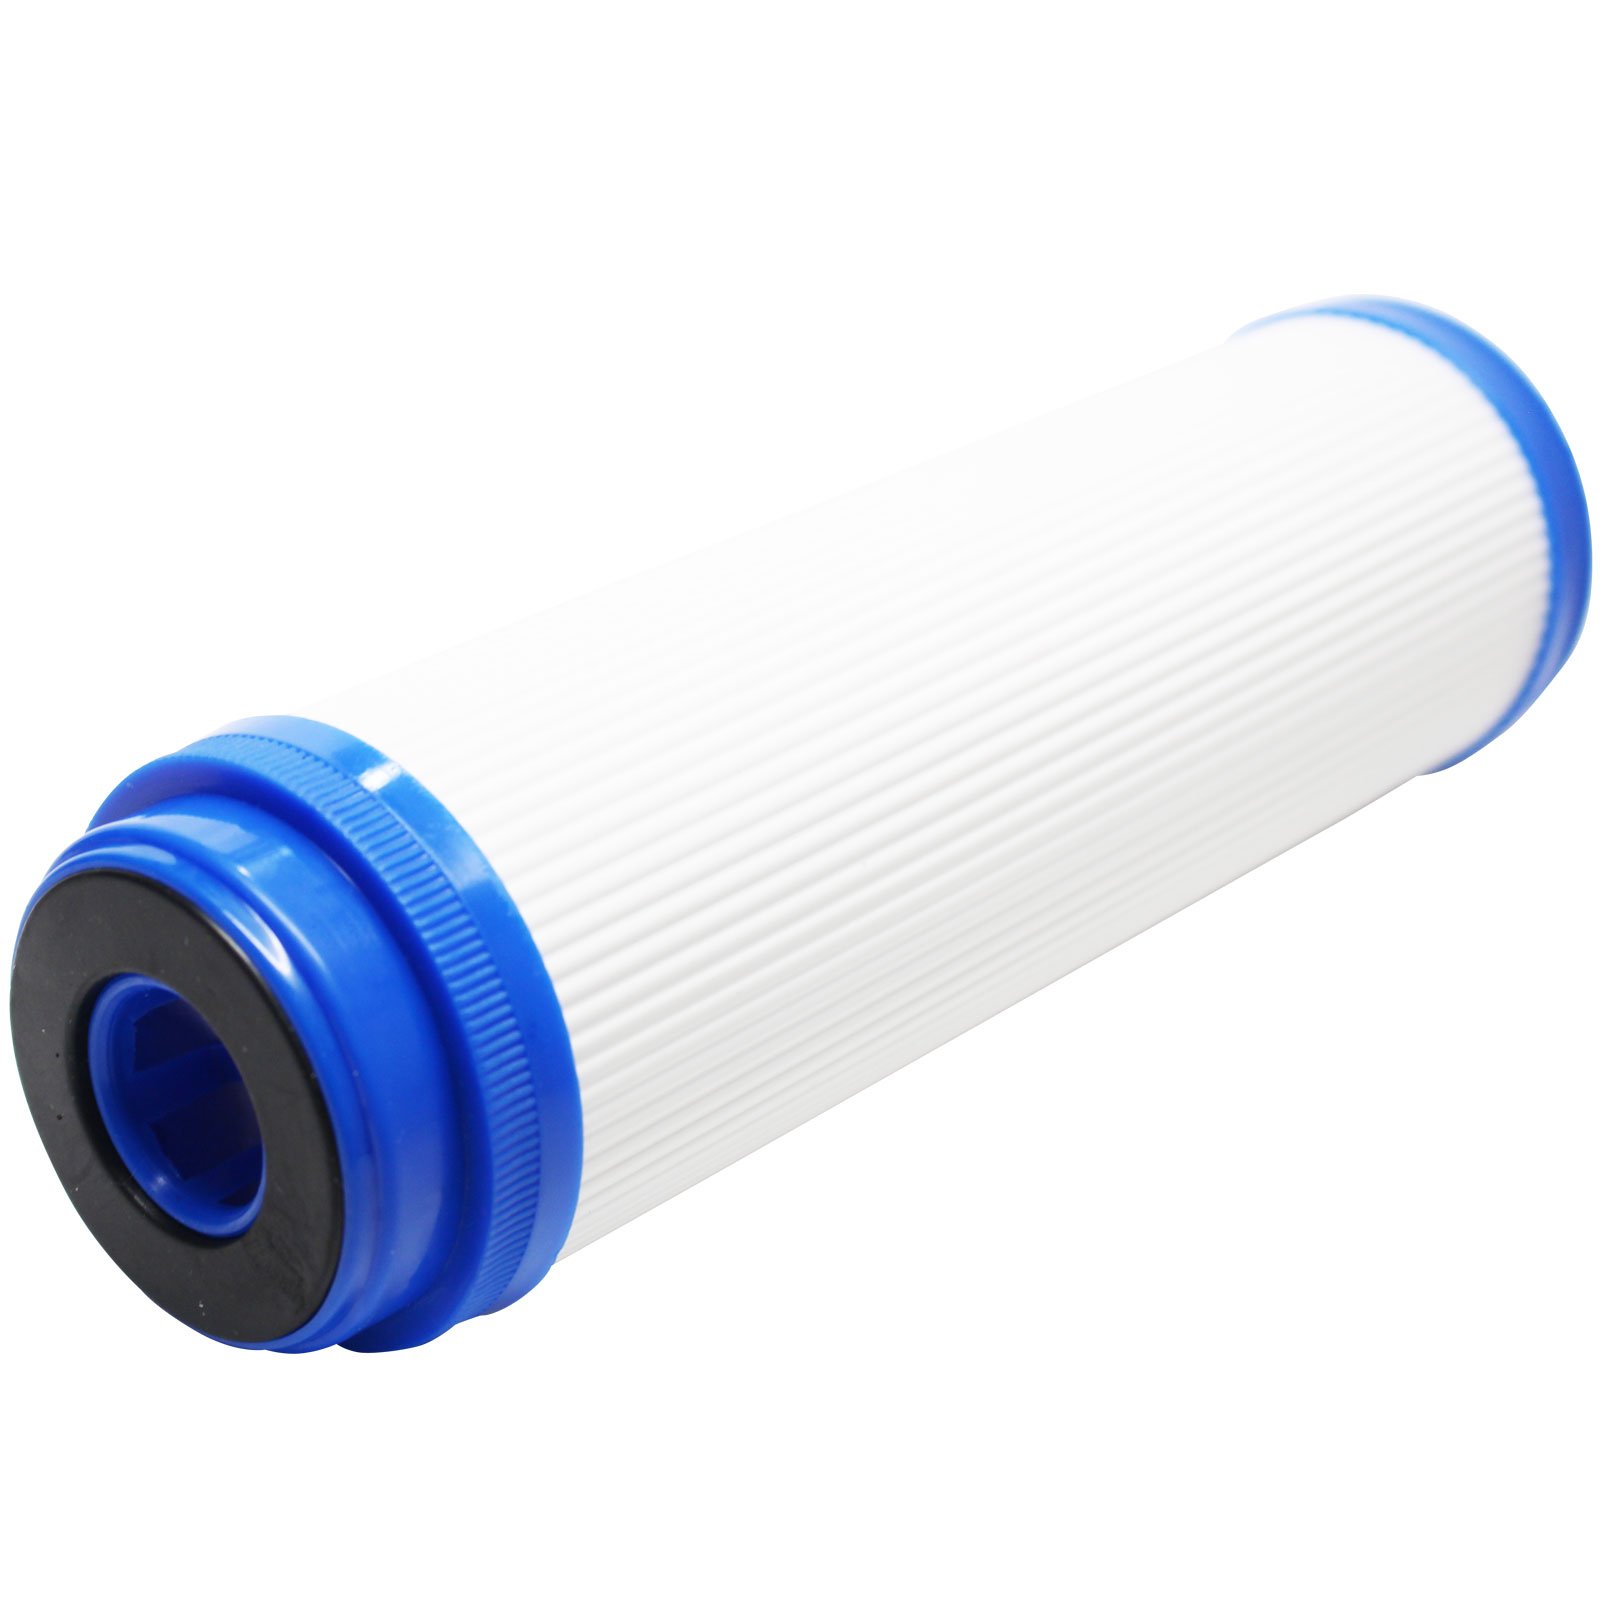 Replacement Filter Kit Compatible with MaxWater 101042 RO System - Includes Carbon Block Filter, PP Sediment Filter & GAC Filter - Denali Pure Brand